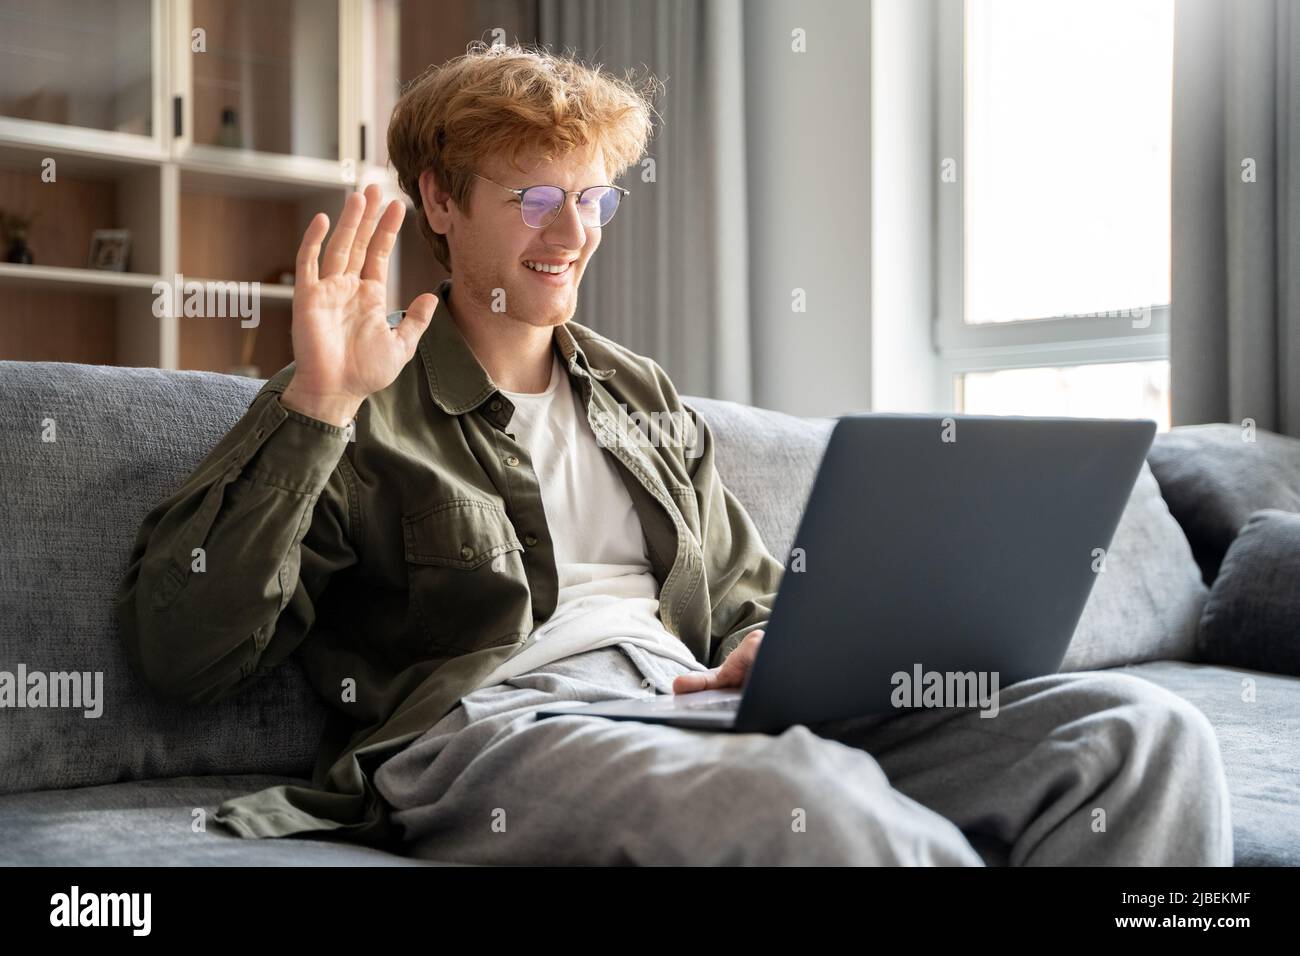 Smiling ginger irish man having video call over laptop computer at home Stock Photo